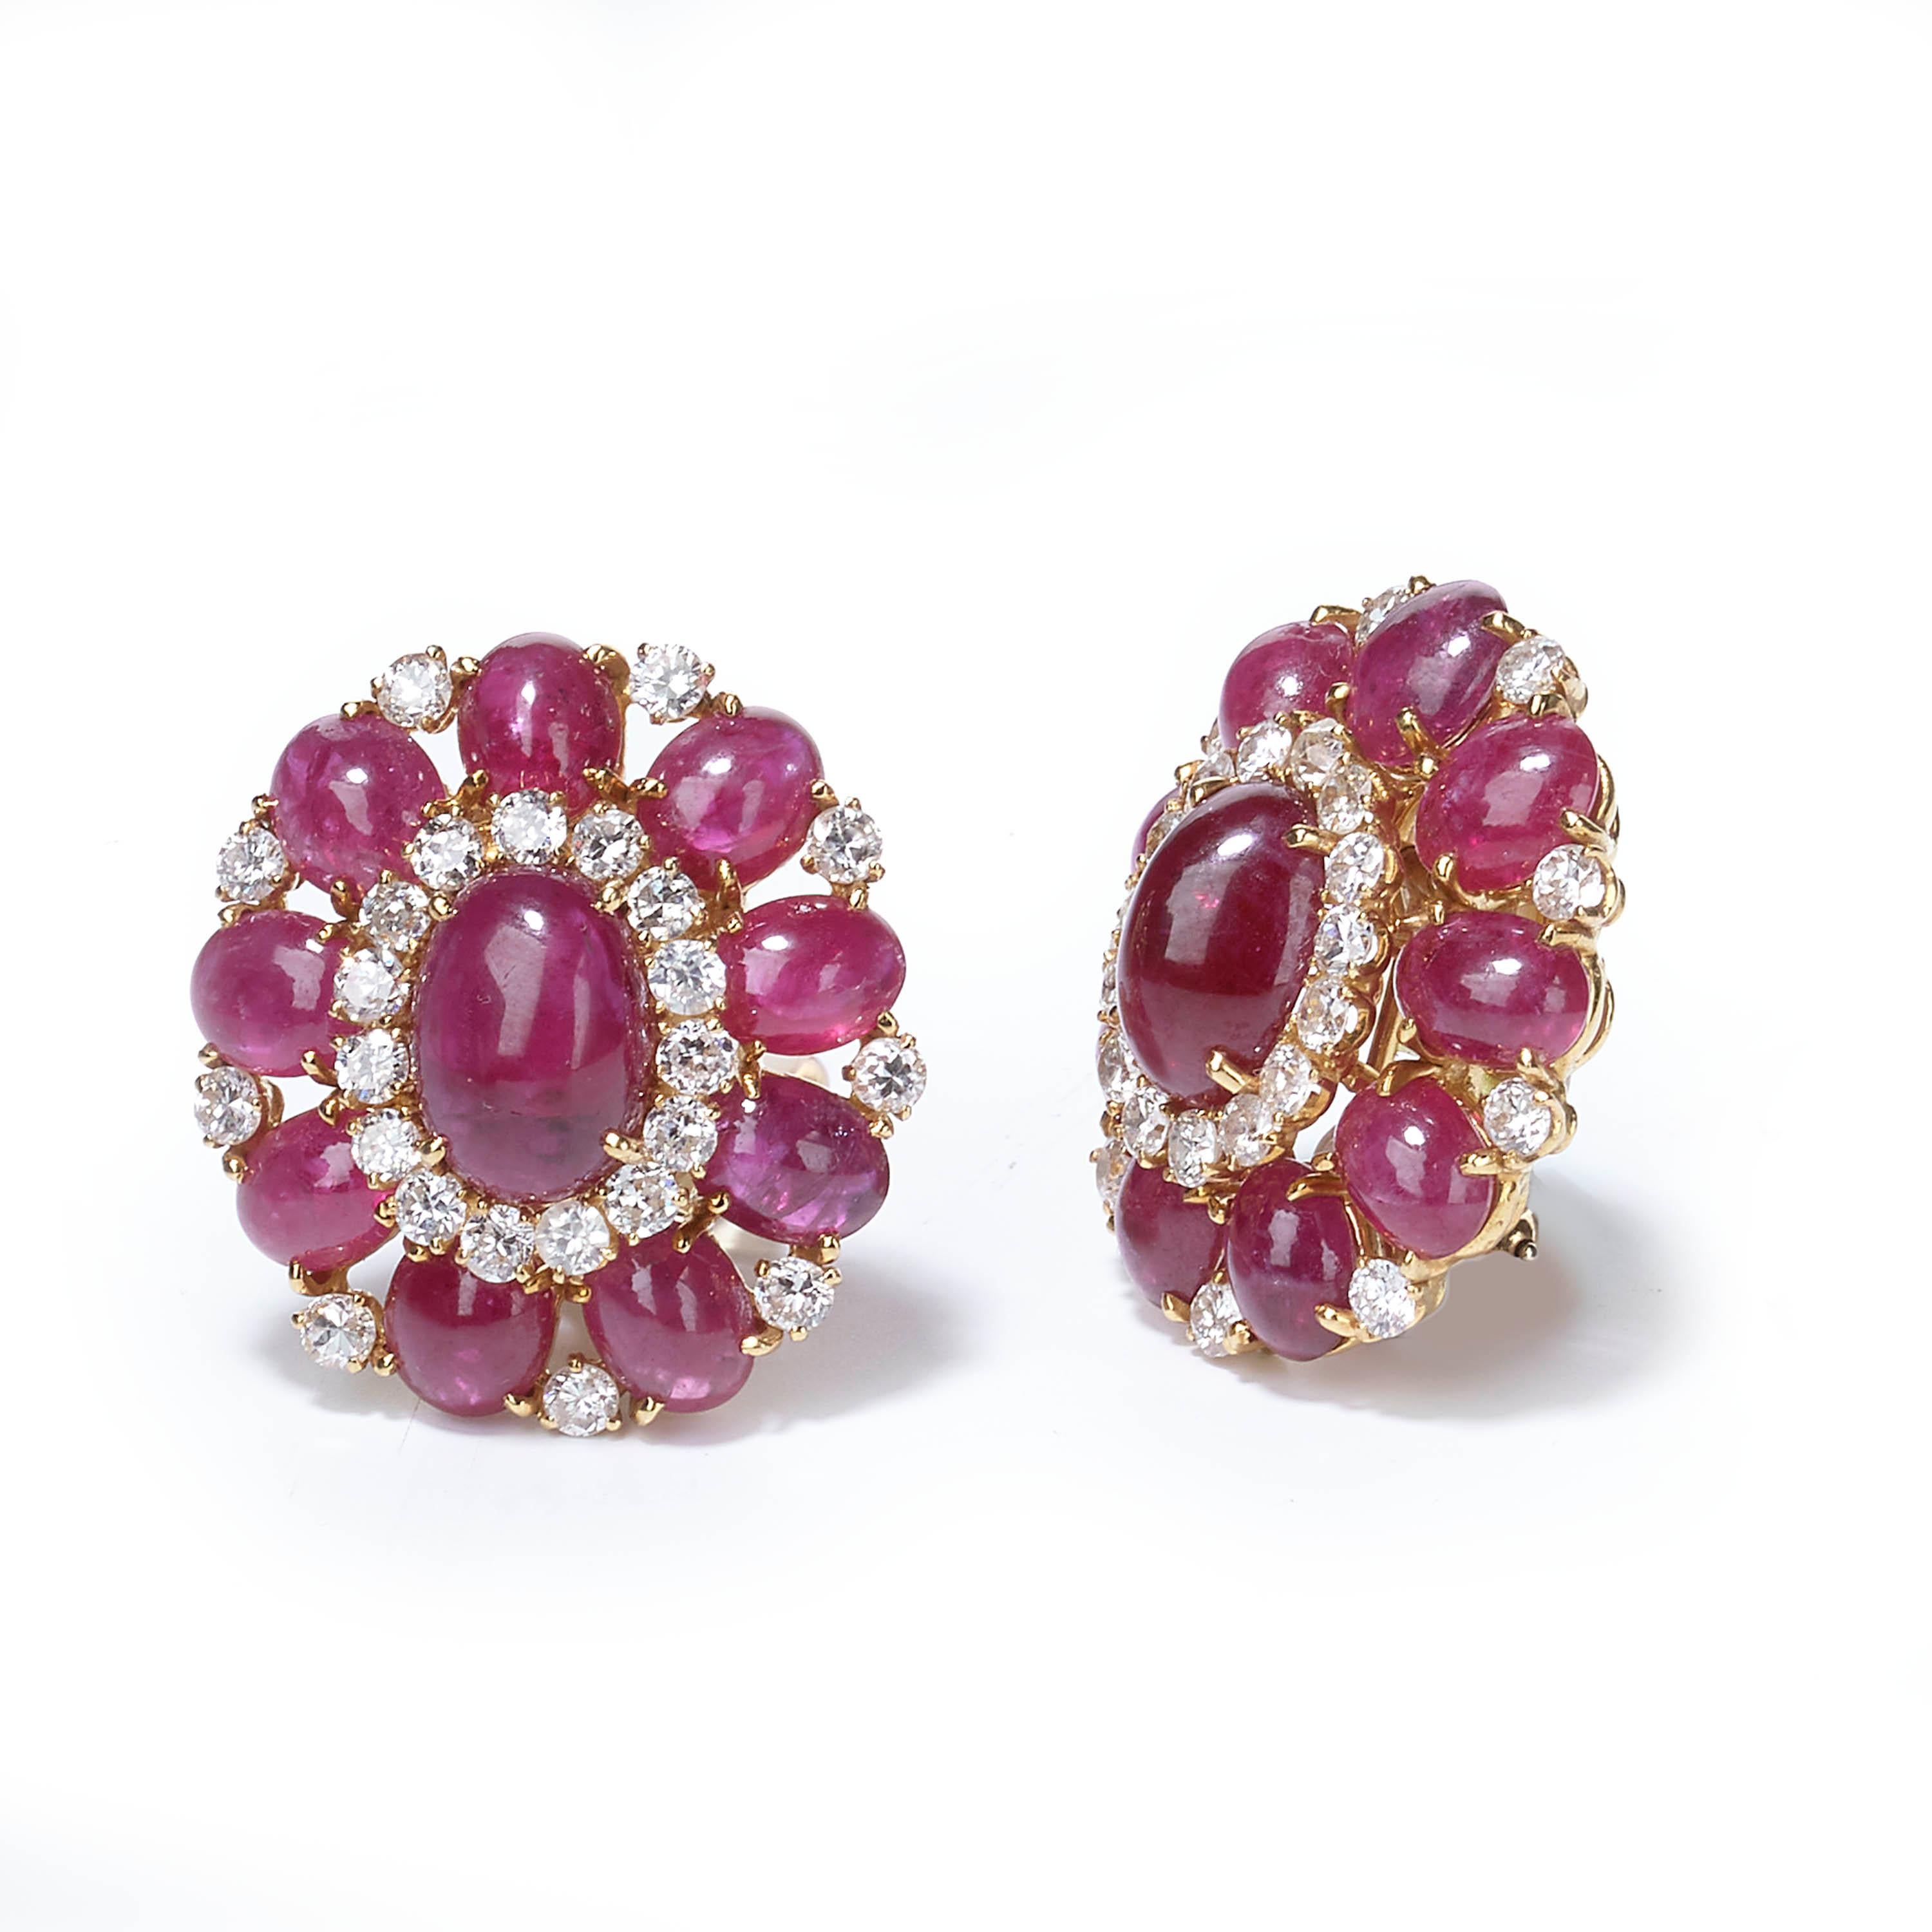 A pair of vintage earrings, consisting of two oval-shaped clusters, each centrally set with an oval, cabochon-cut ruby and surrounded by a further nine rubies, and twenty-four round brilliant-cut diamonds, all claw set and mounted in 18ct yellow